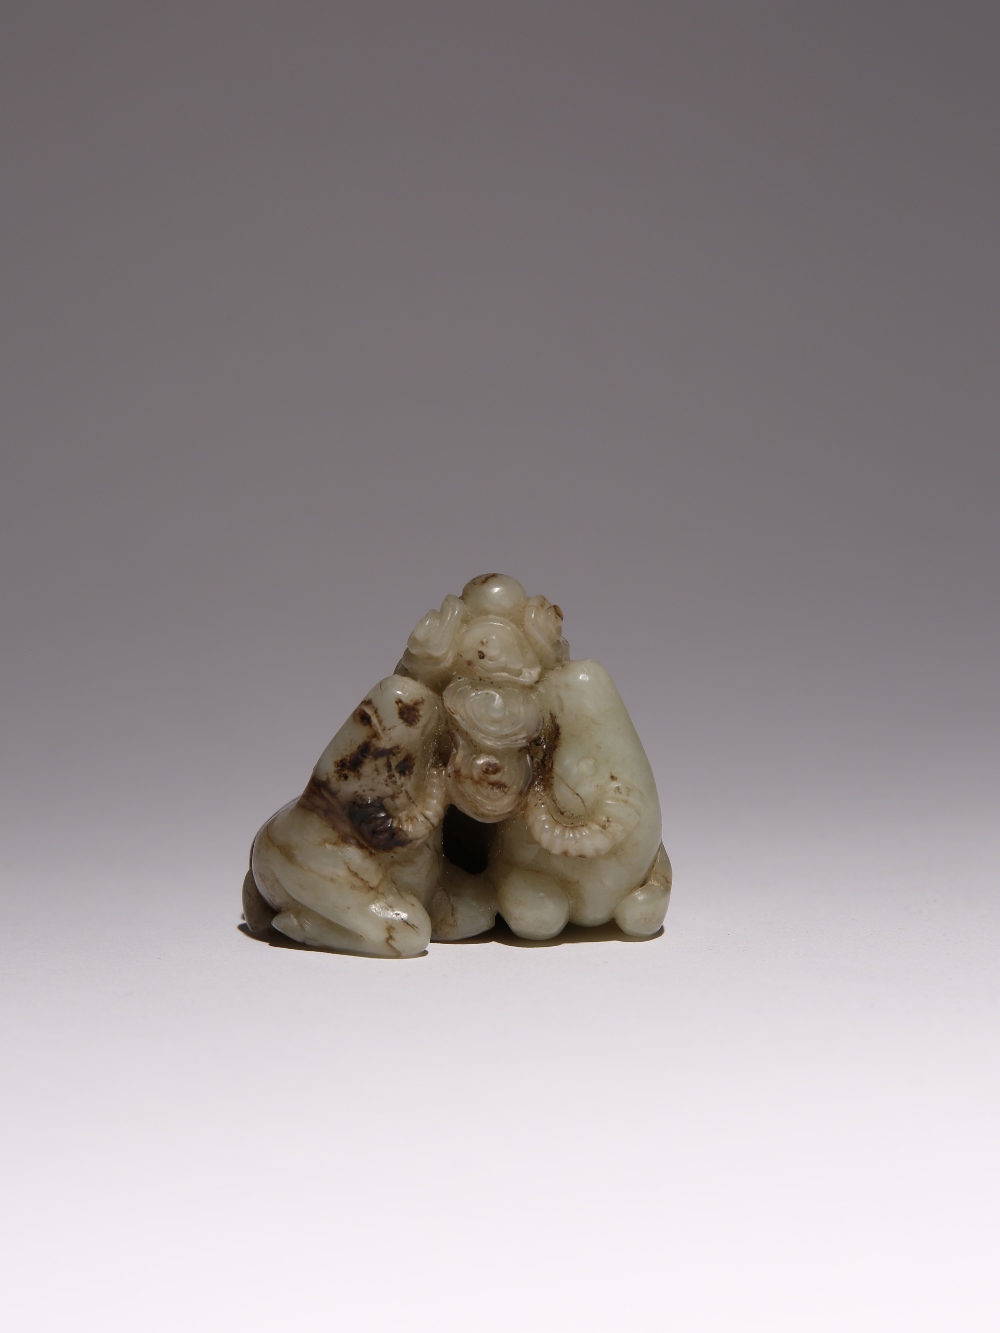 A CHINESE CELADON JADE CARVING OF TWO RAMS QING DYNASTY Formed as two recumbent rams lying side by